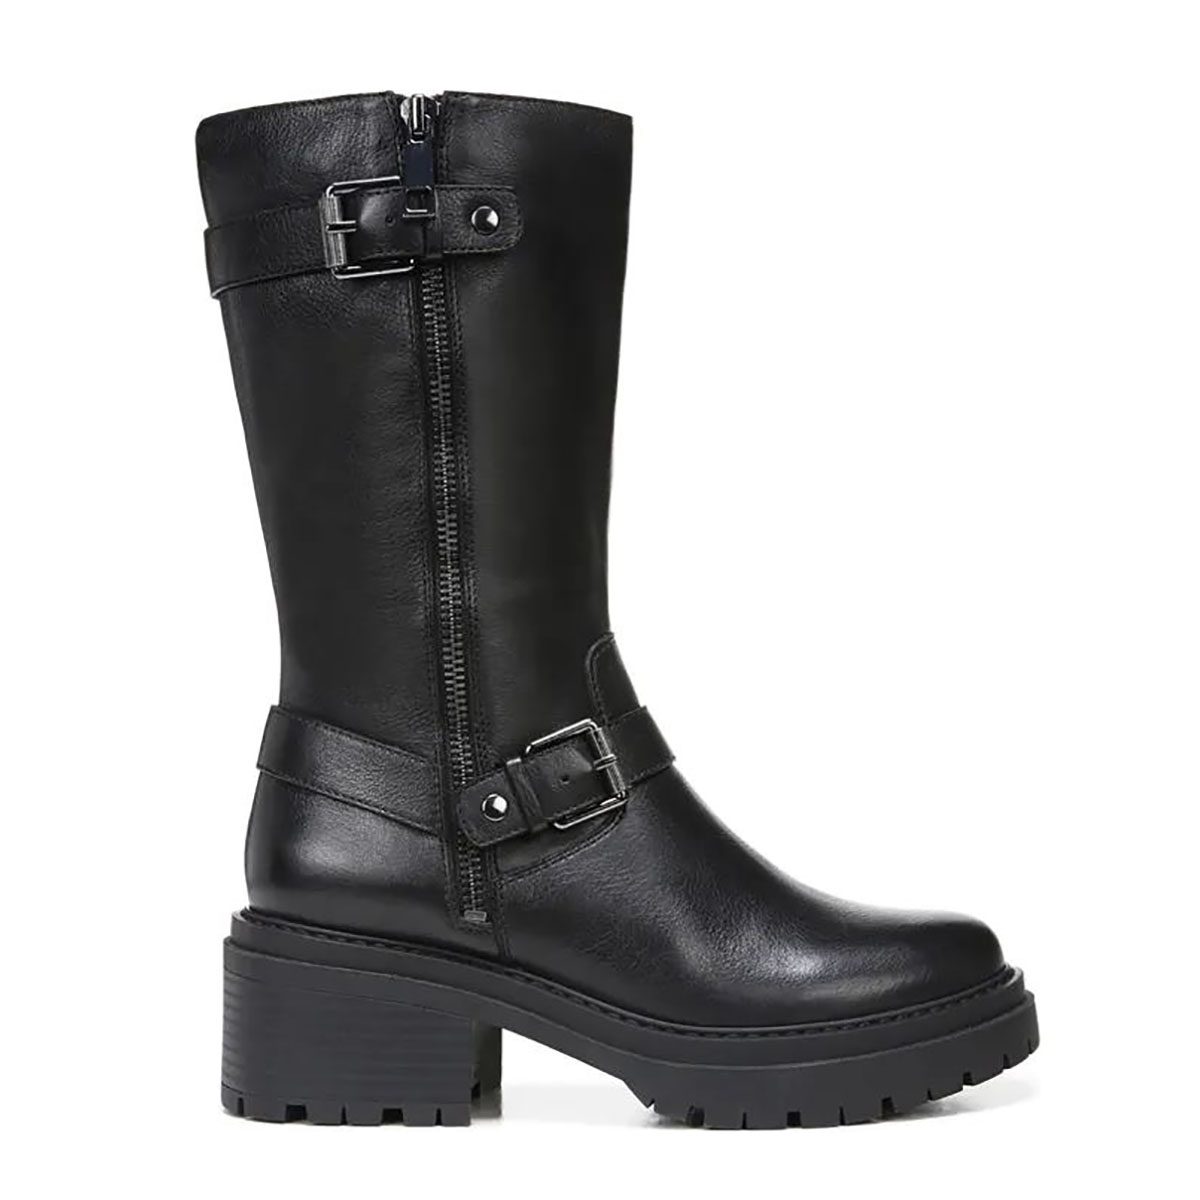 Naturalizer Jager Black Mid Calf Leather Boots H7227L3001 - WOOKI.COM